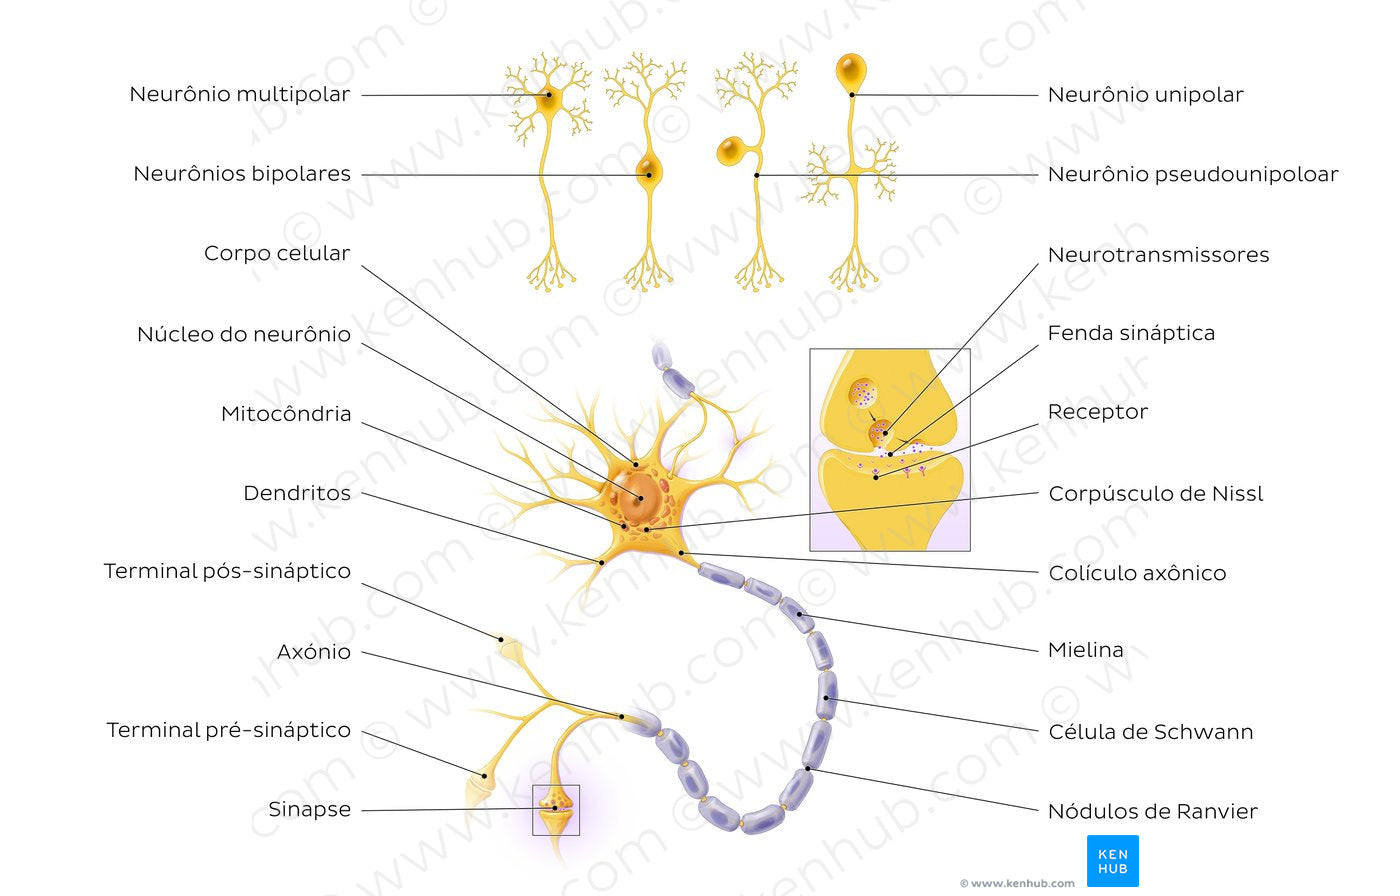 Neurons: Structure and types (Portuguese)